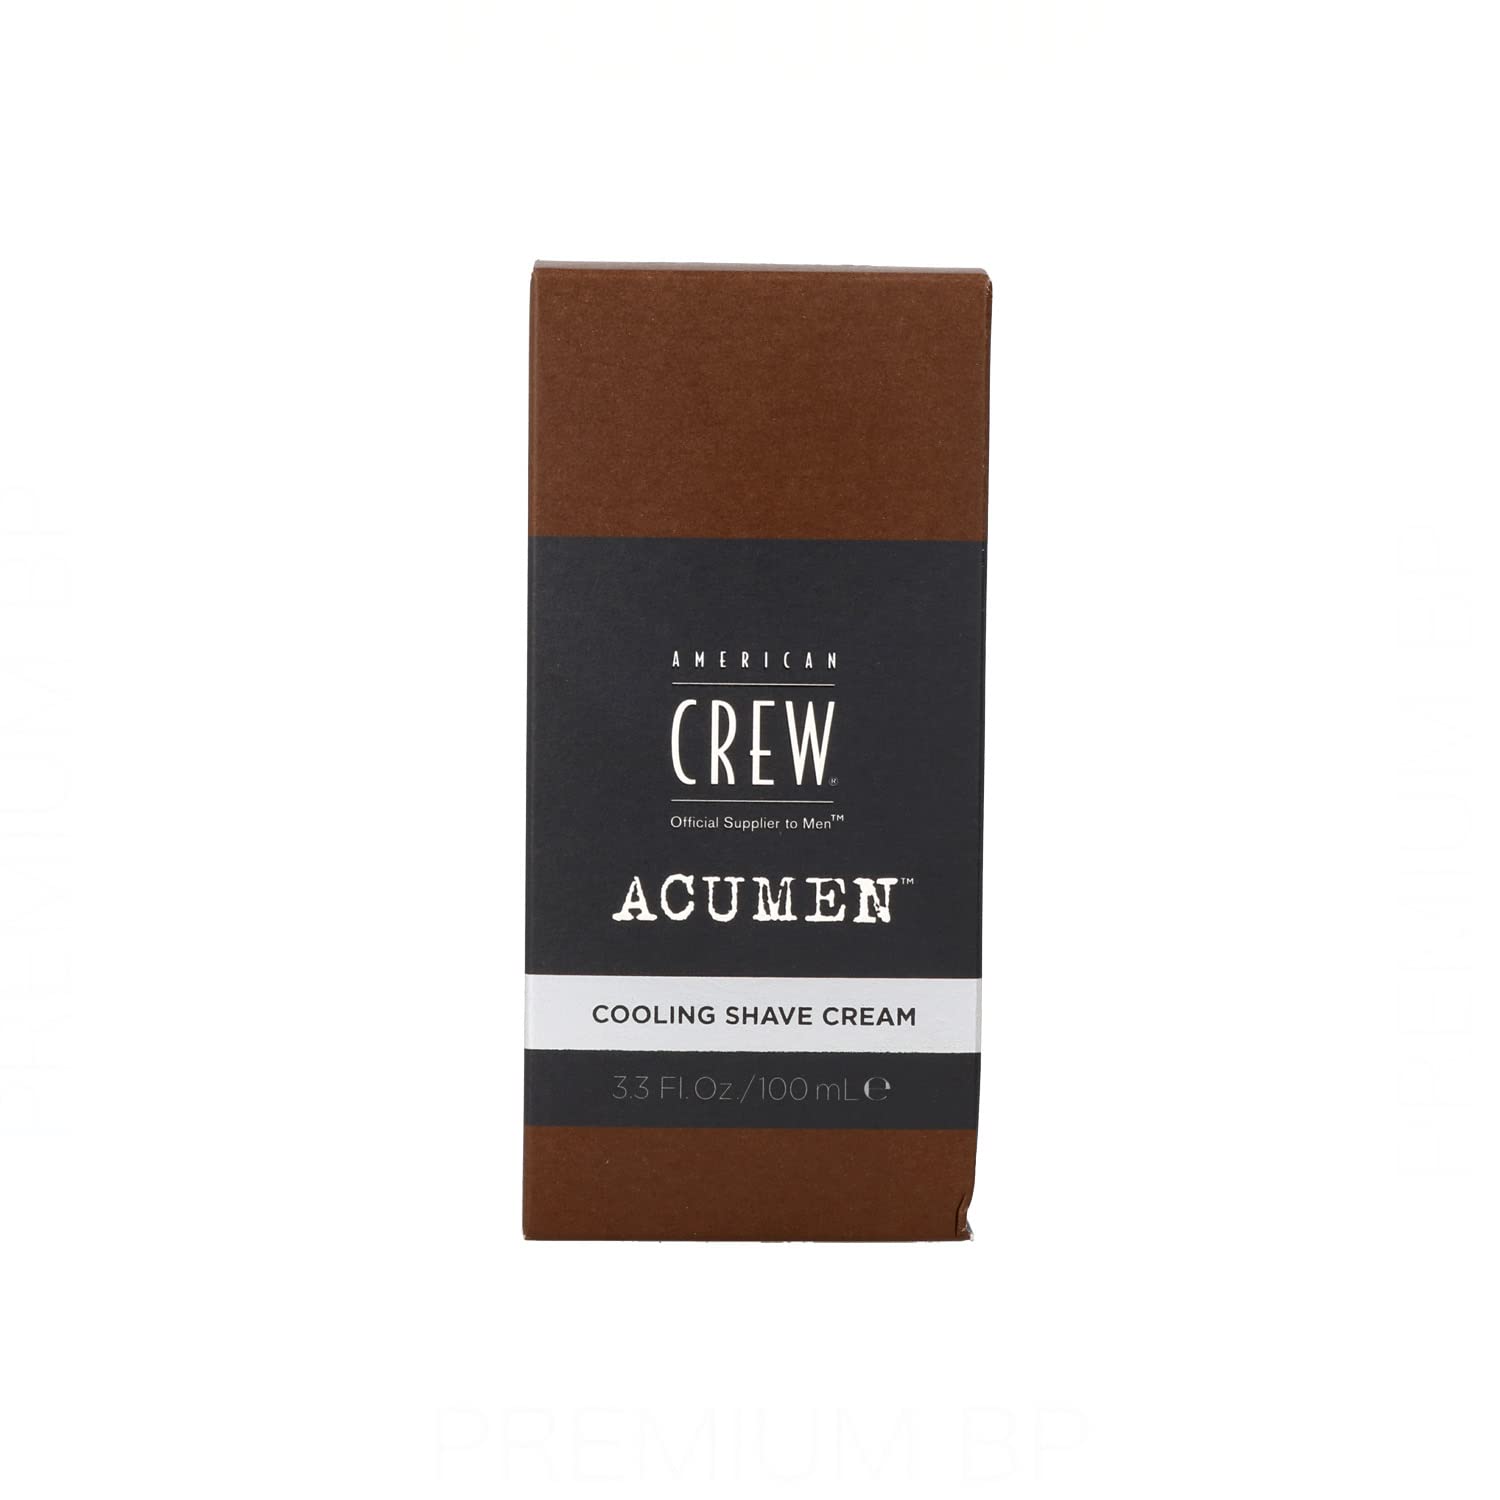 Shave Gel for Men by American Crew